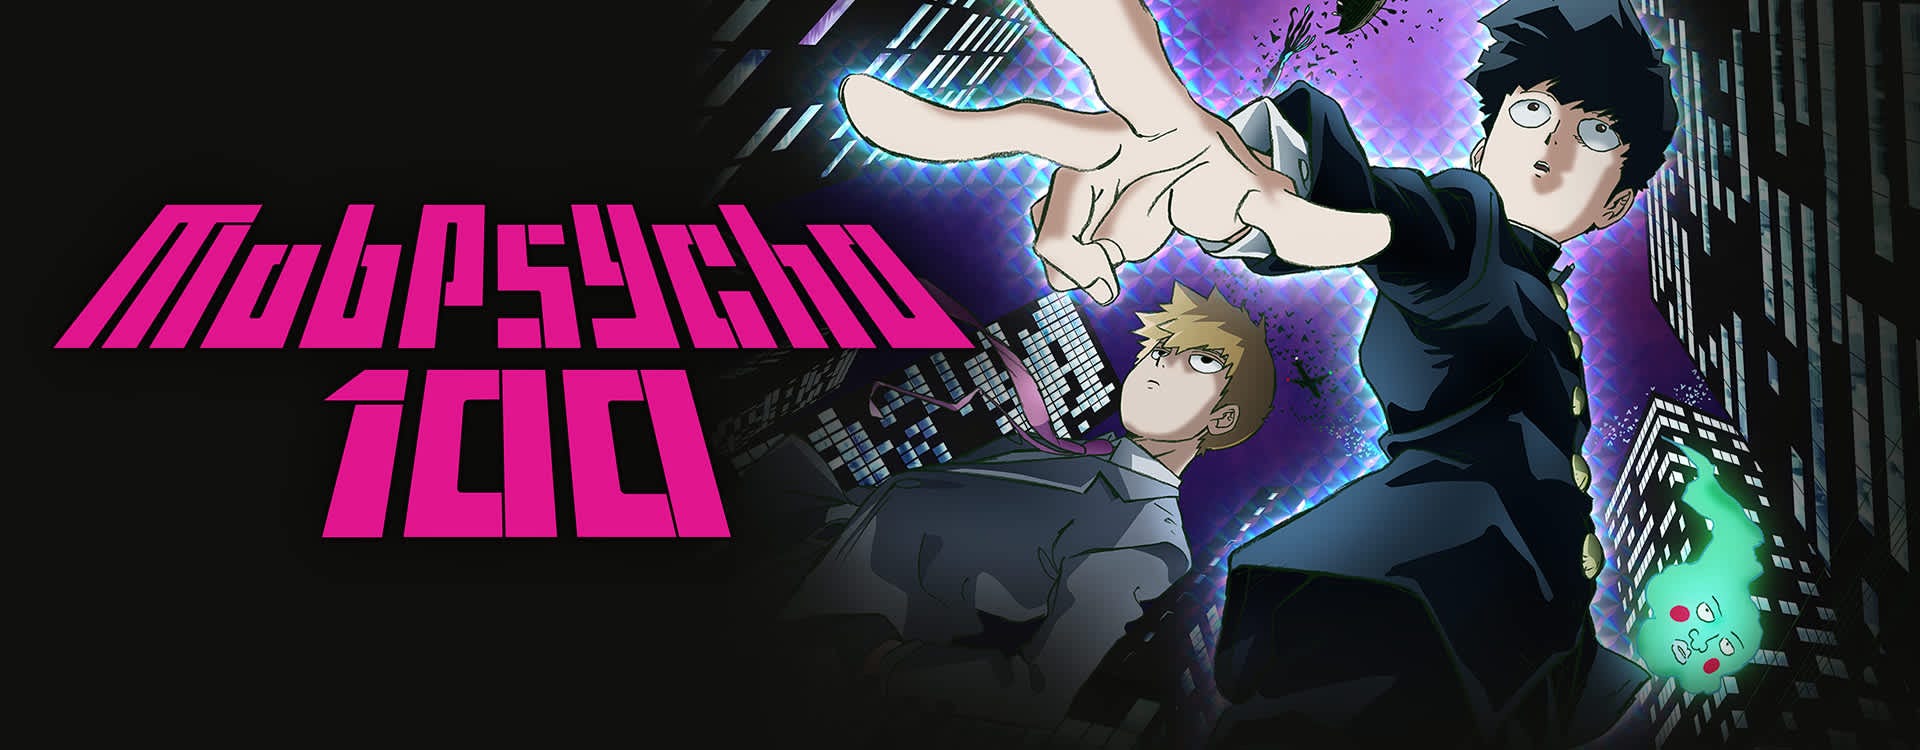 Will there be a Mob Psycho 100 season 4? [Update Jan 1]